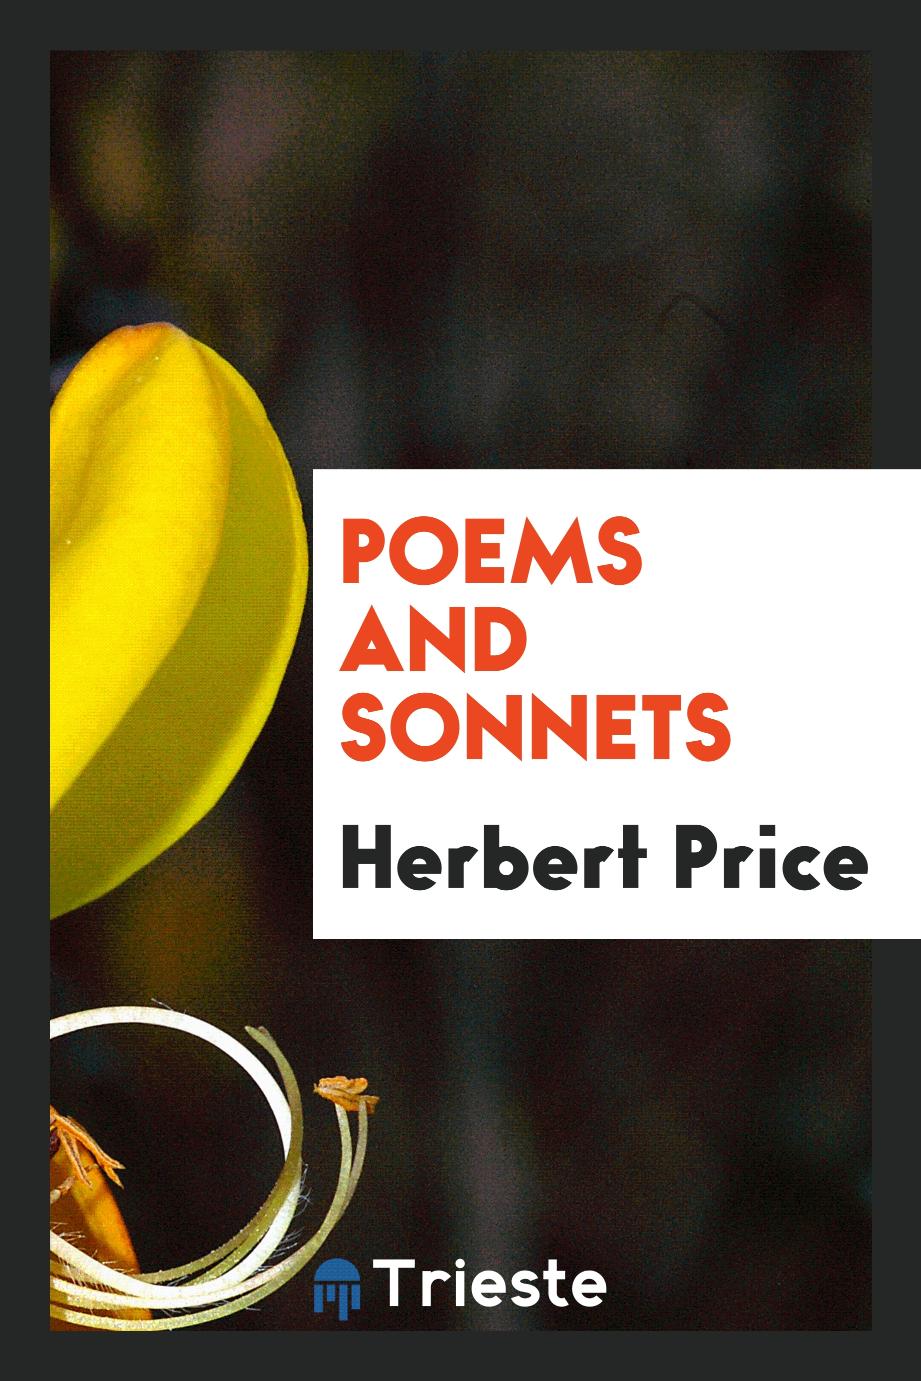 Poems and sonnets